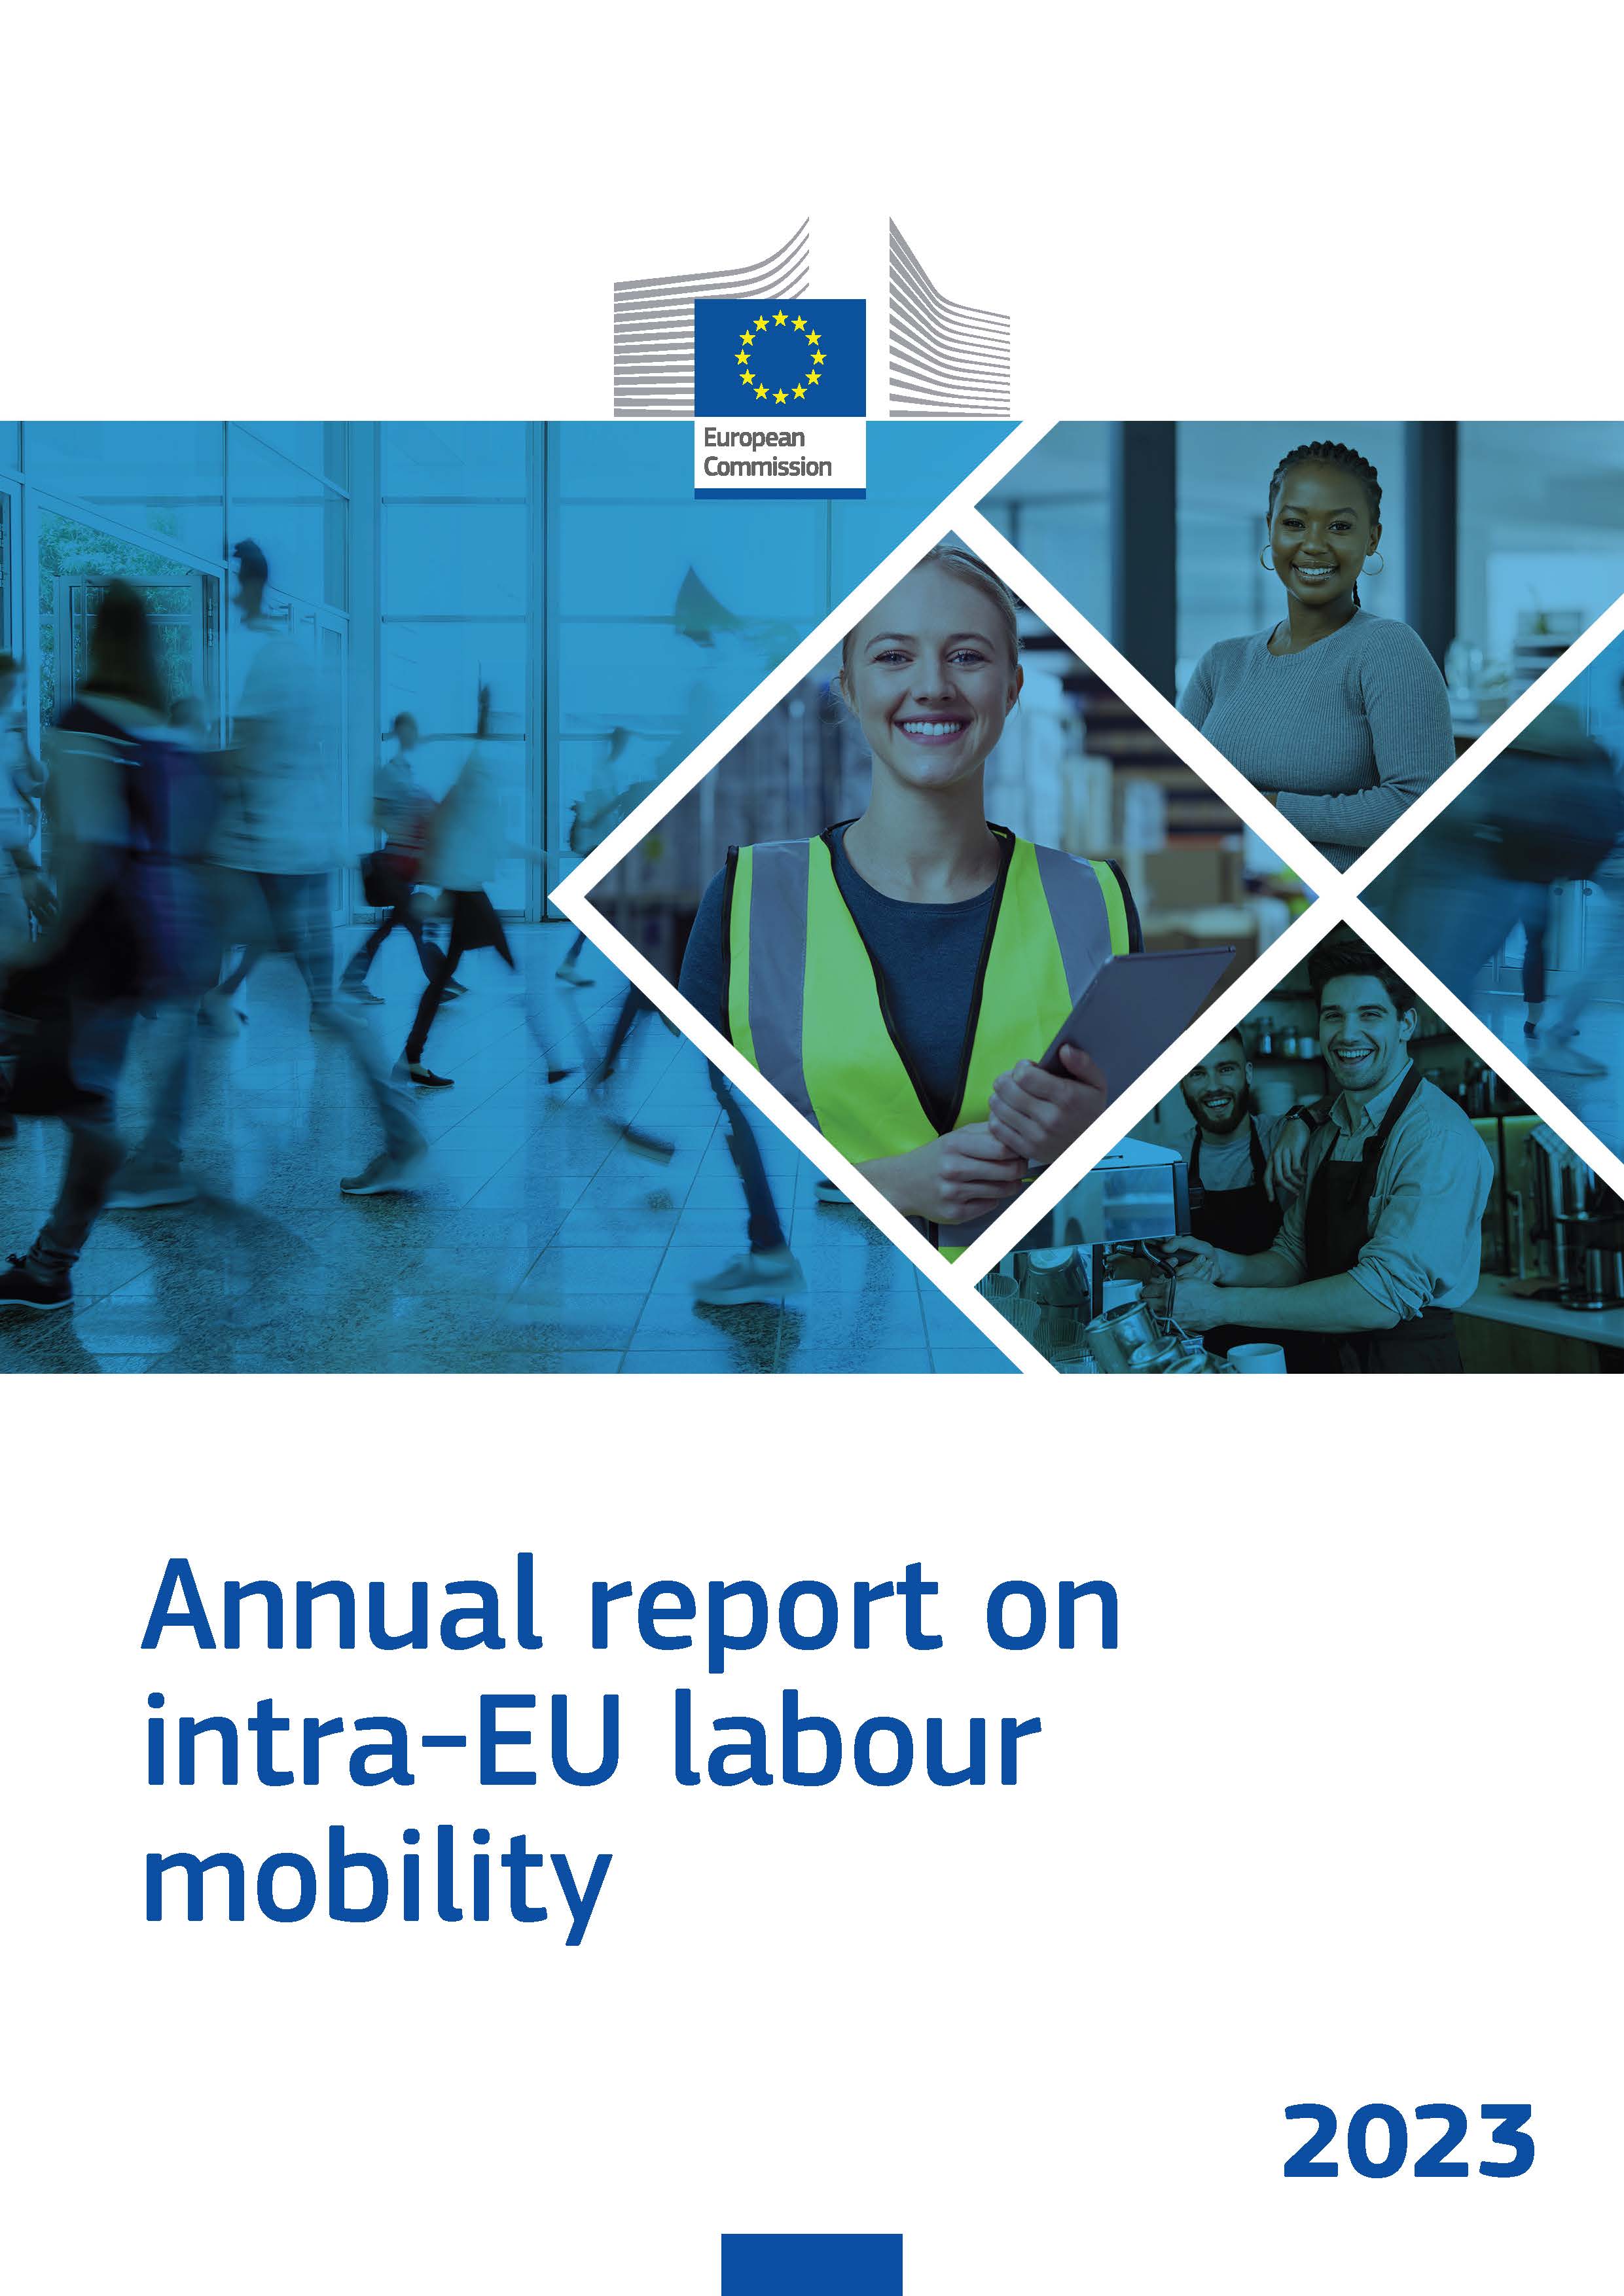 Annual Report on Intra-EU Labour Mobility 2023